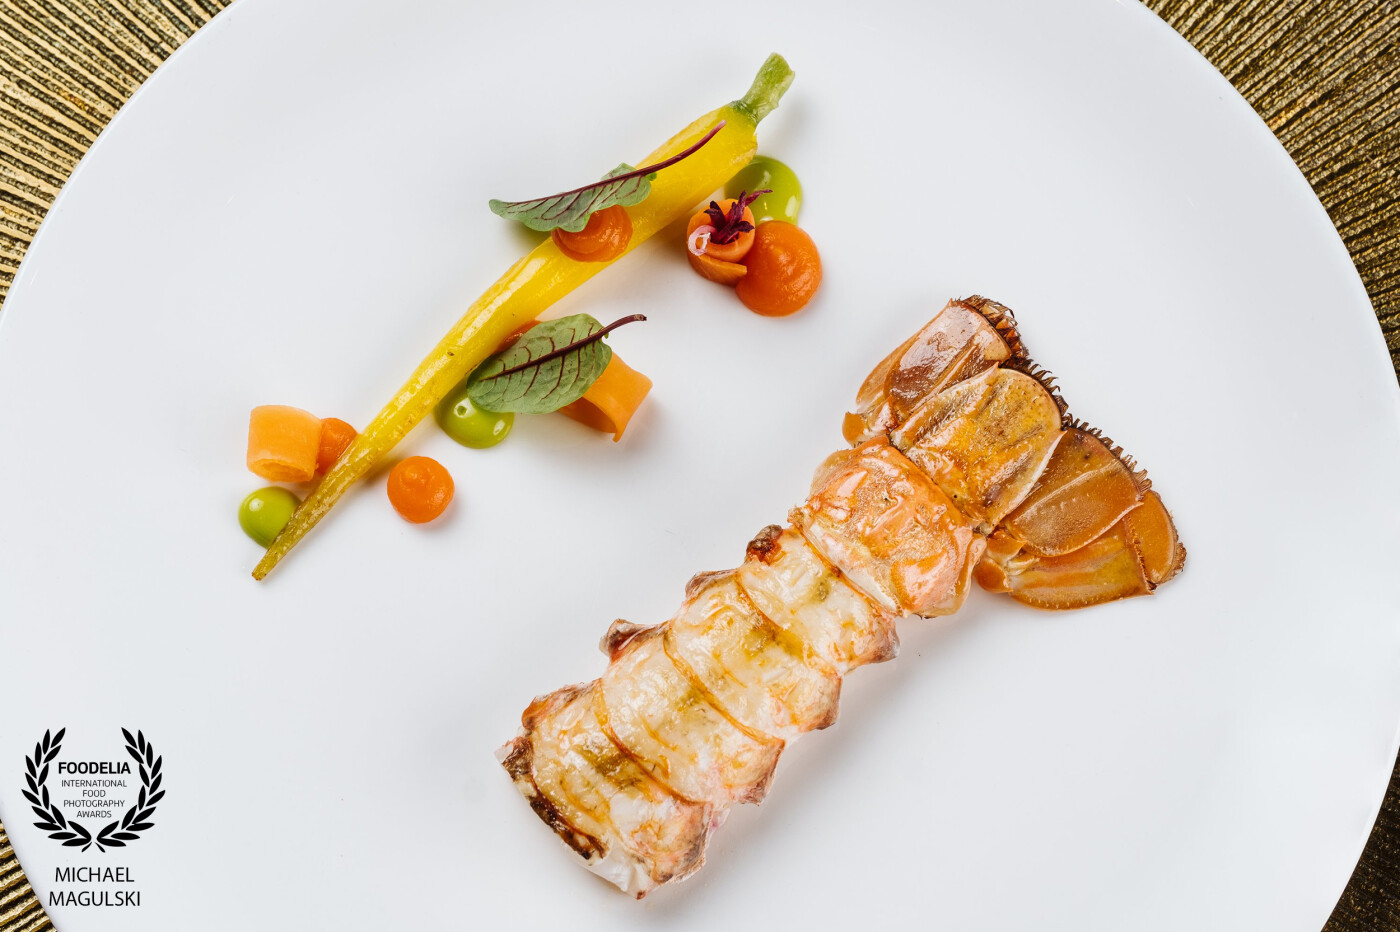 This photo was taken during a shoot with star chef Quirin Brundobler. The dish is a lobster tail with a hint of carrot